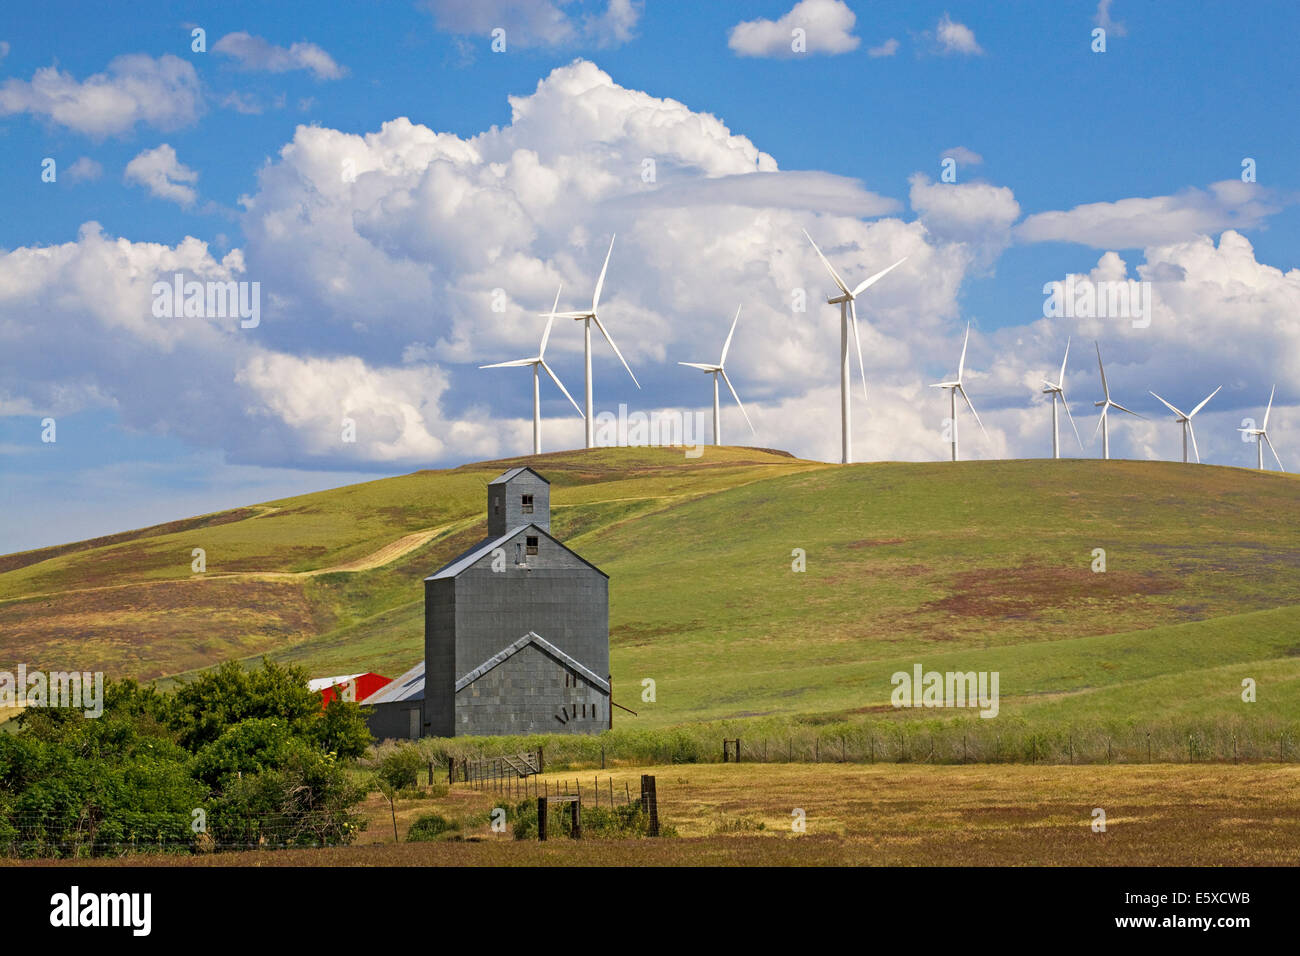 A farm and wheat silo overshadowed by wind turbines in the remote Palouse Empire region,  a farming and wheat growing region of eastern Washington. Stock Photo